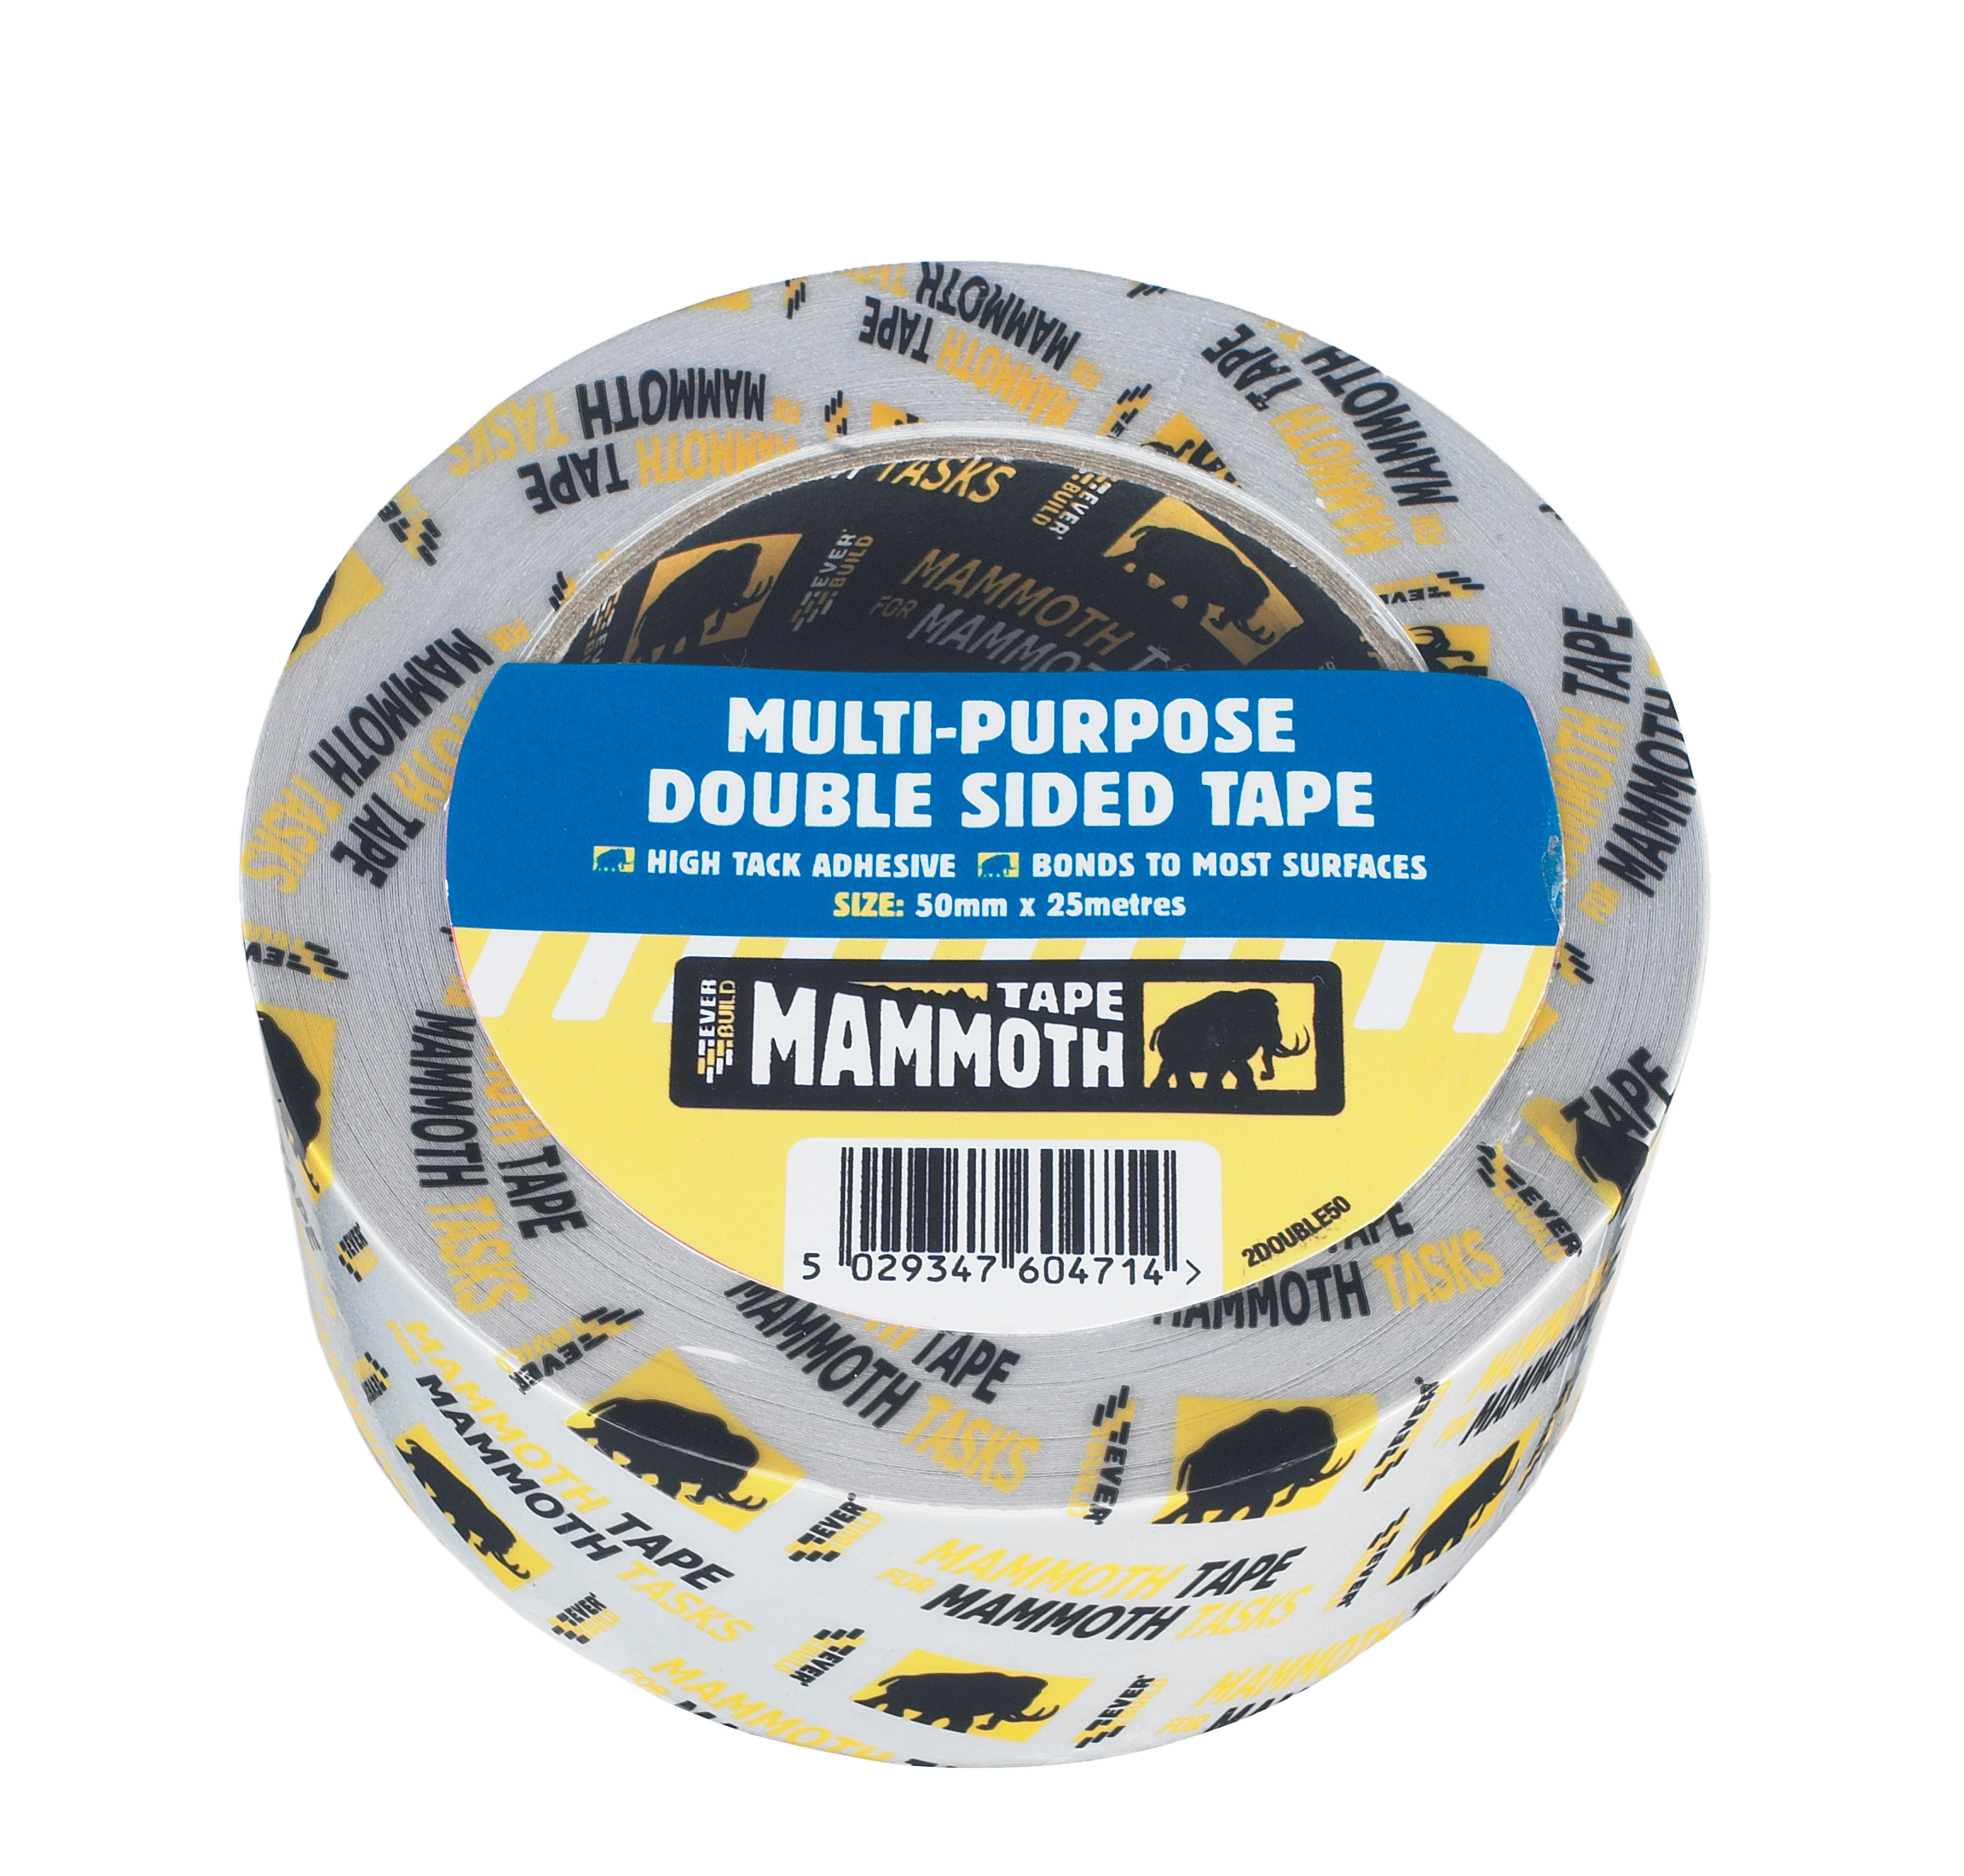 Mammoth Multi-Purpose Double Sided Tape (25m Roll)